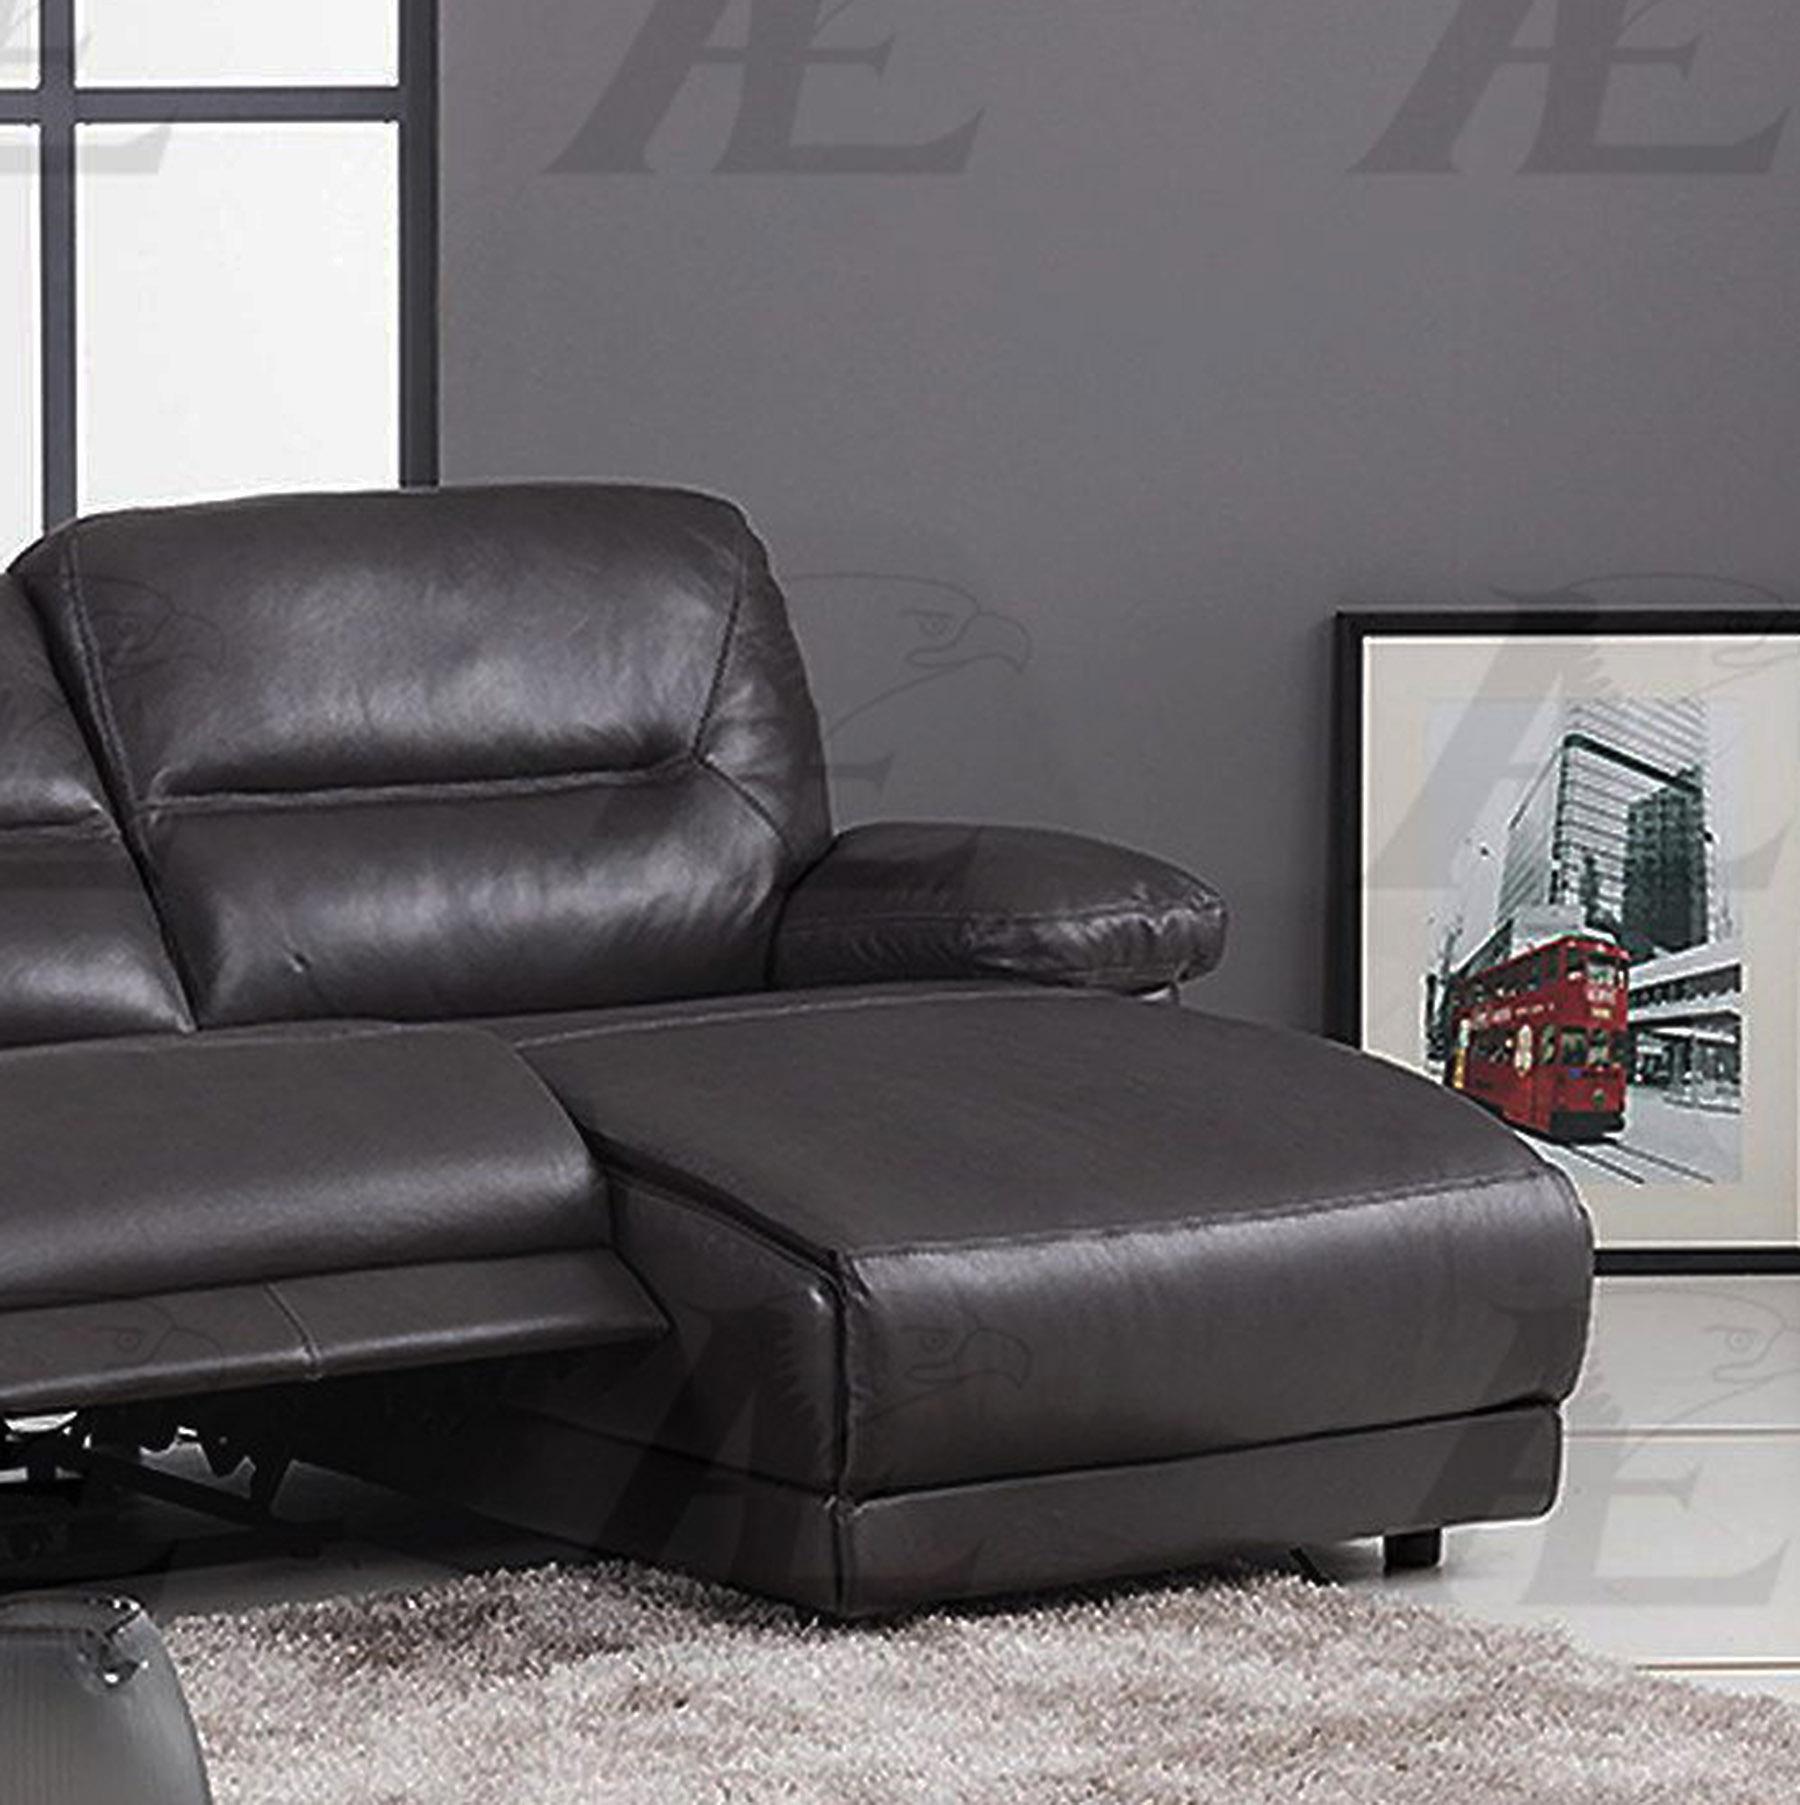 

    
American Eagle Furniture EK-L079-DG Dark Gray Sectional Recliner Sofa Chaise Right Hand Chase LEATHER SPLIT 2Pcs
